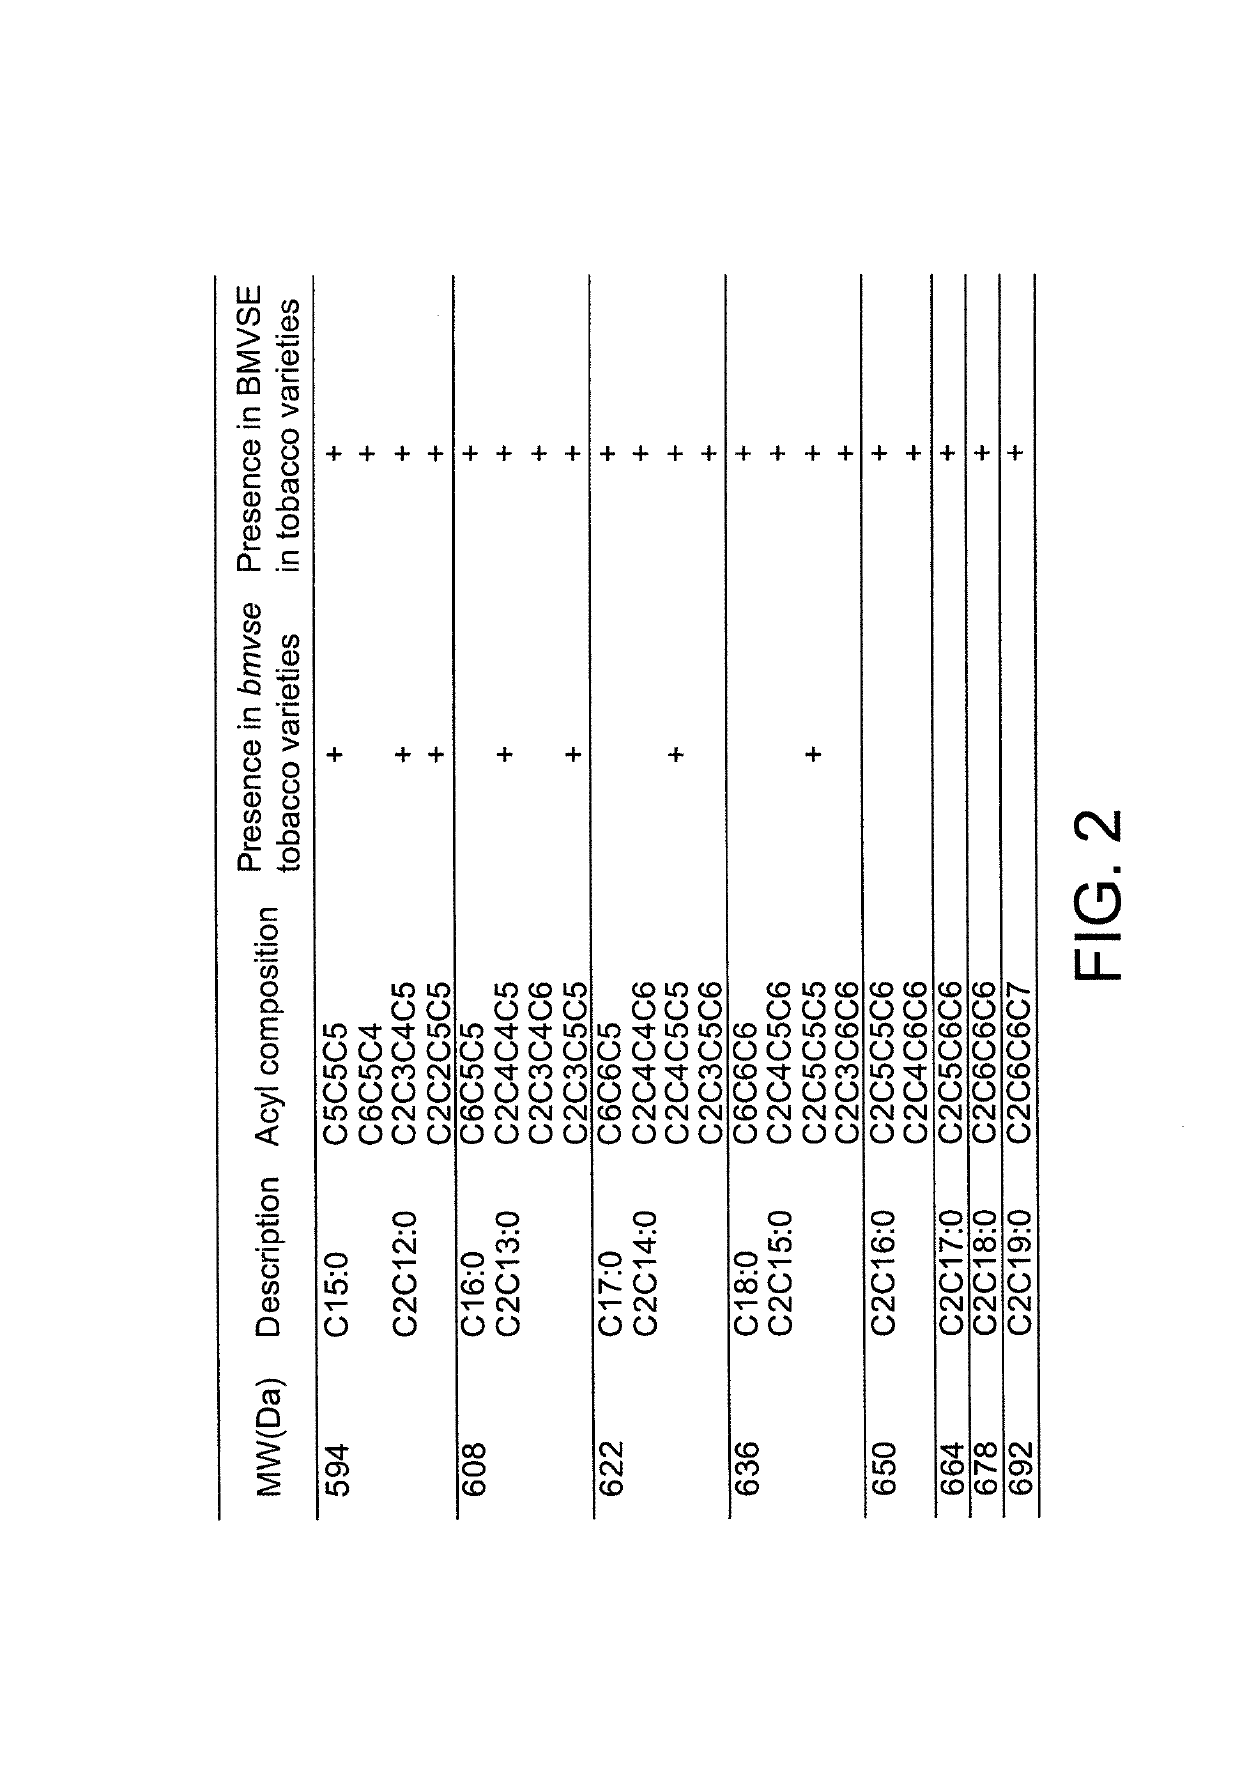 Isopropylmalate synthase from <i>Nicotiana tabacum </i>and methods and uses thereof